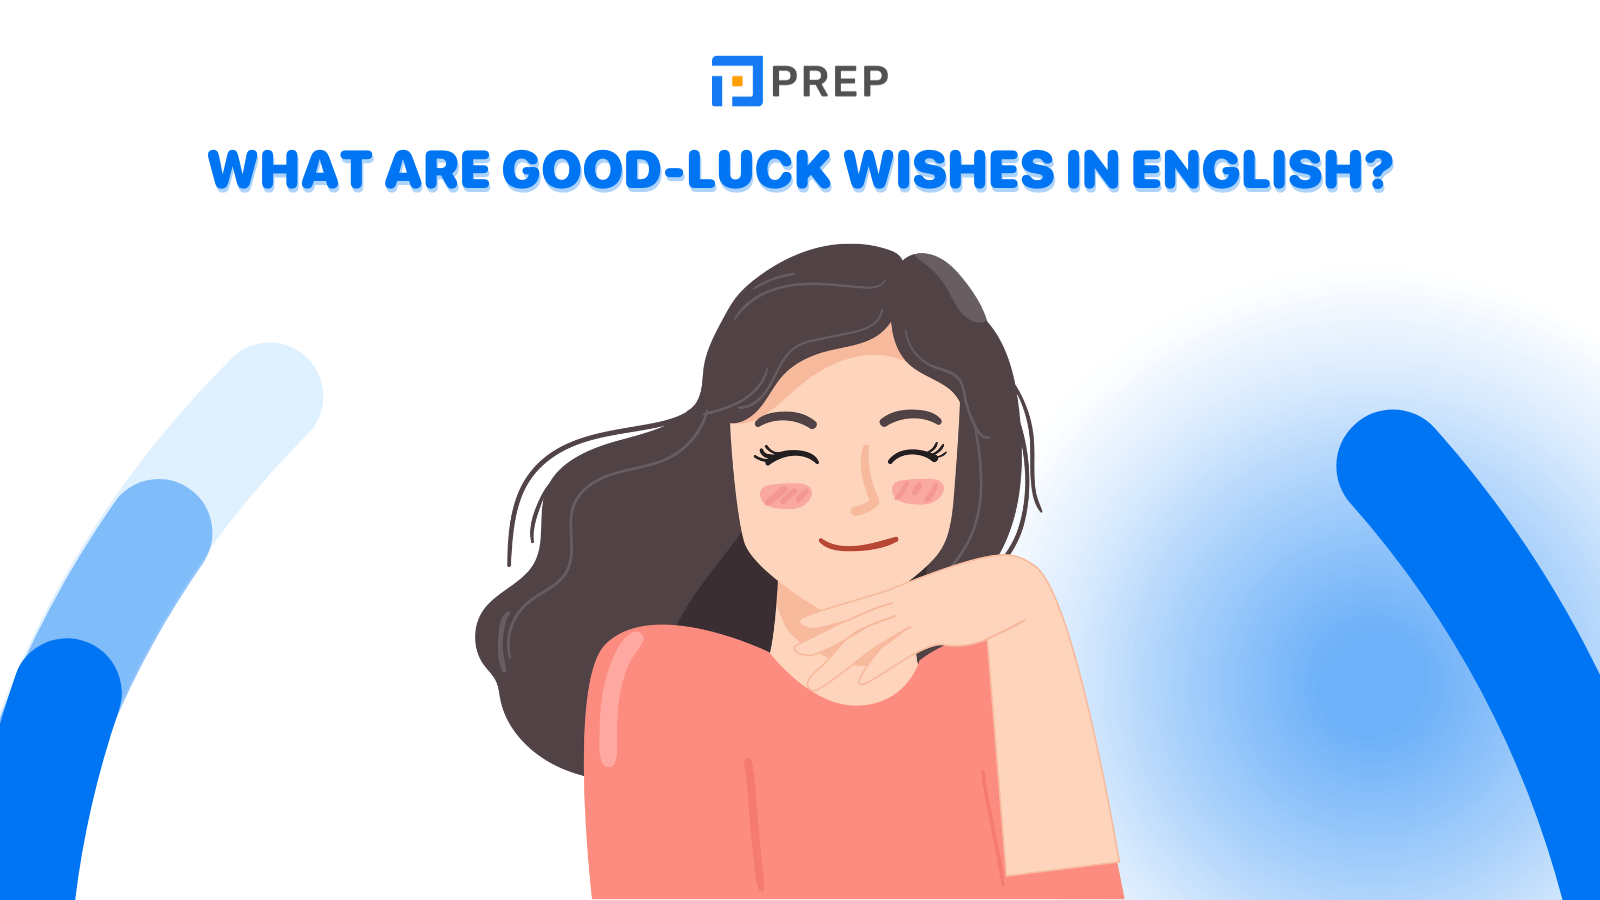 What are good-luck wishes in English?